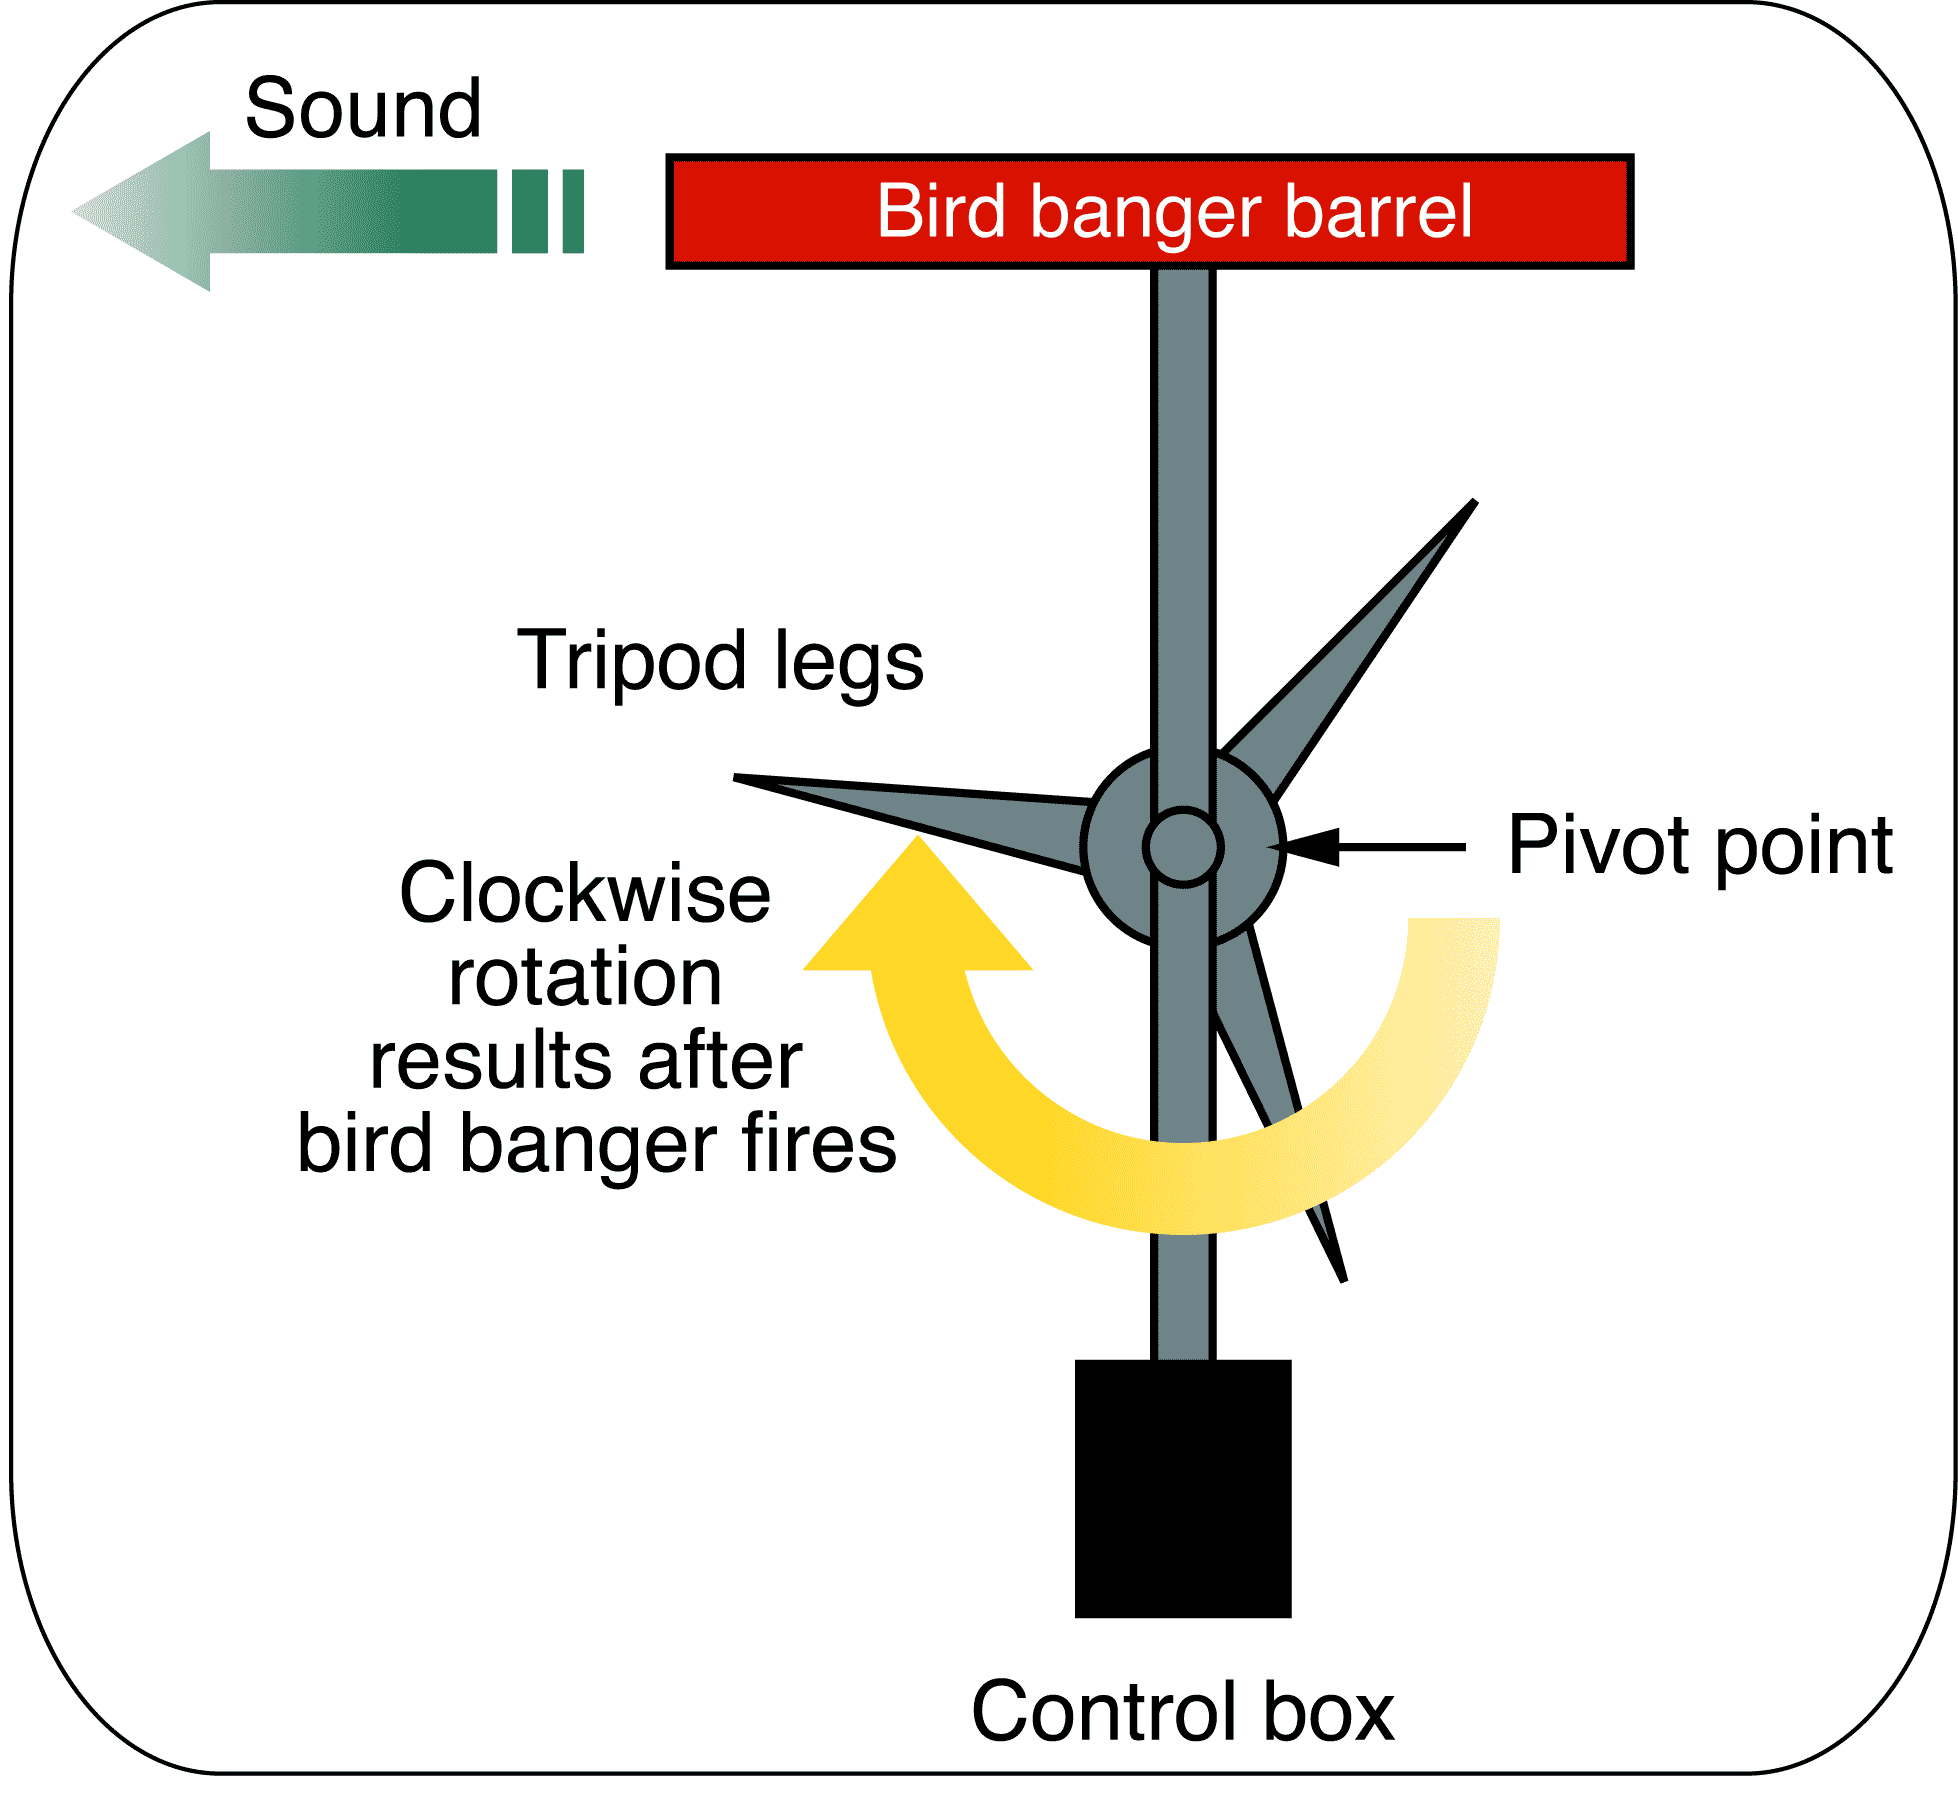 This schematic is an overhead view of a bird banger showing how sound waves exit the barrel of the bird banger when it fires and the effect of the firing on the rotation of the bird banger.